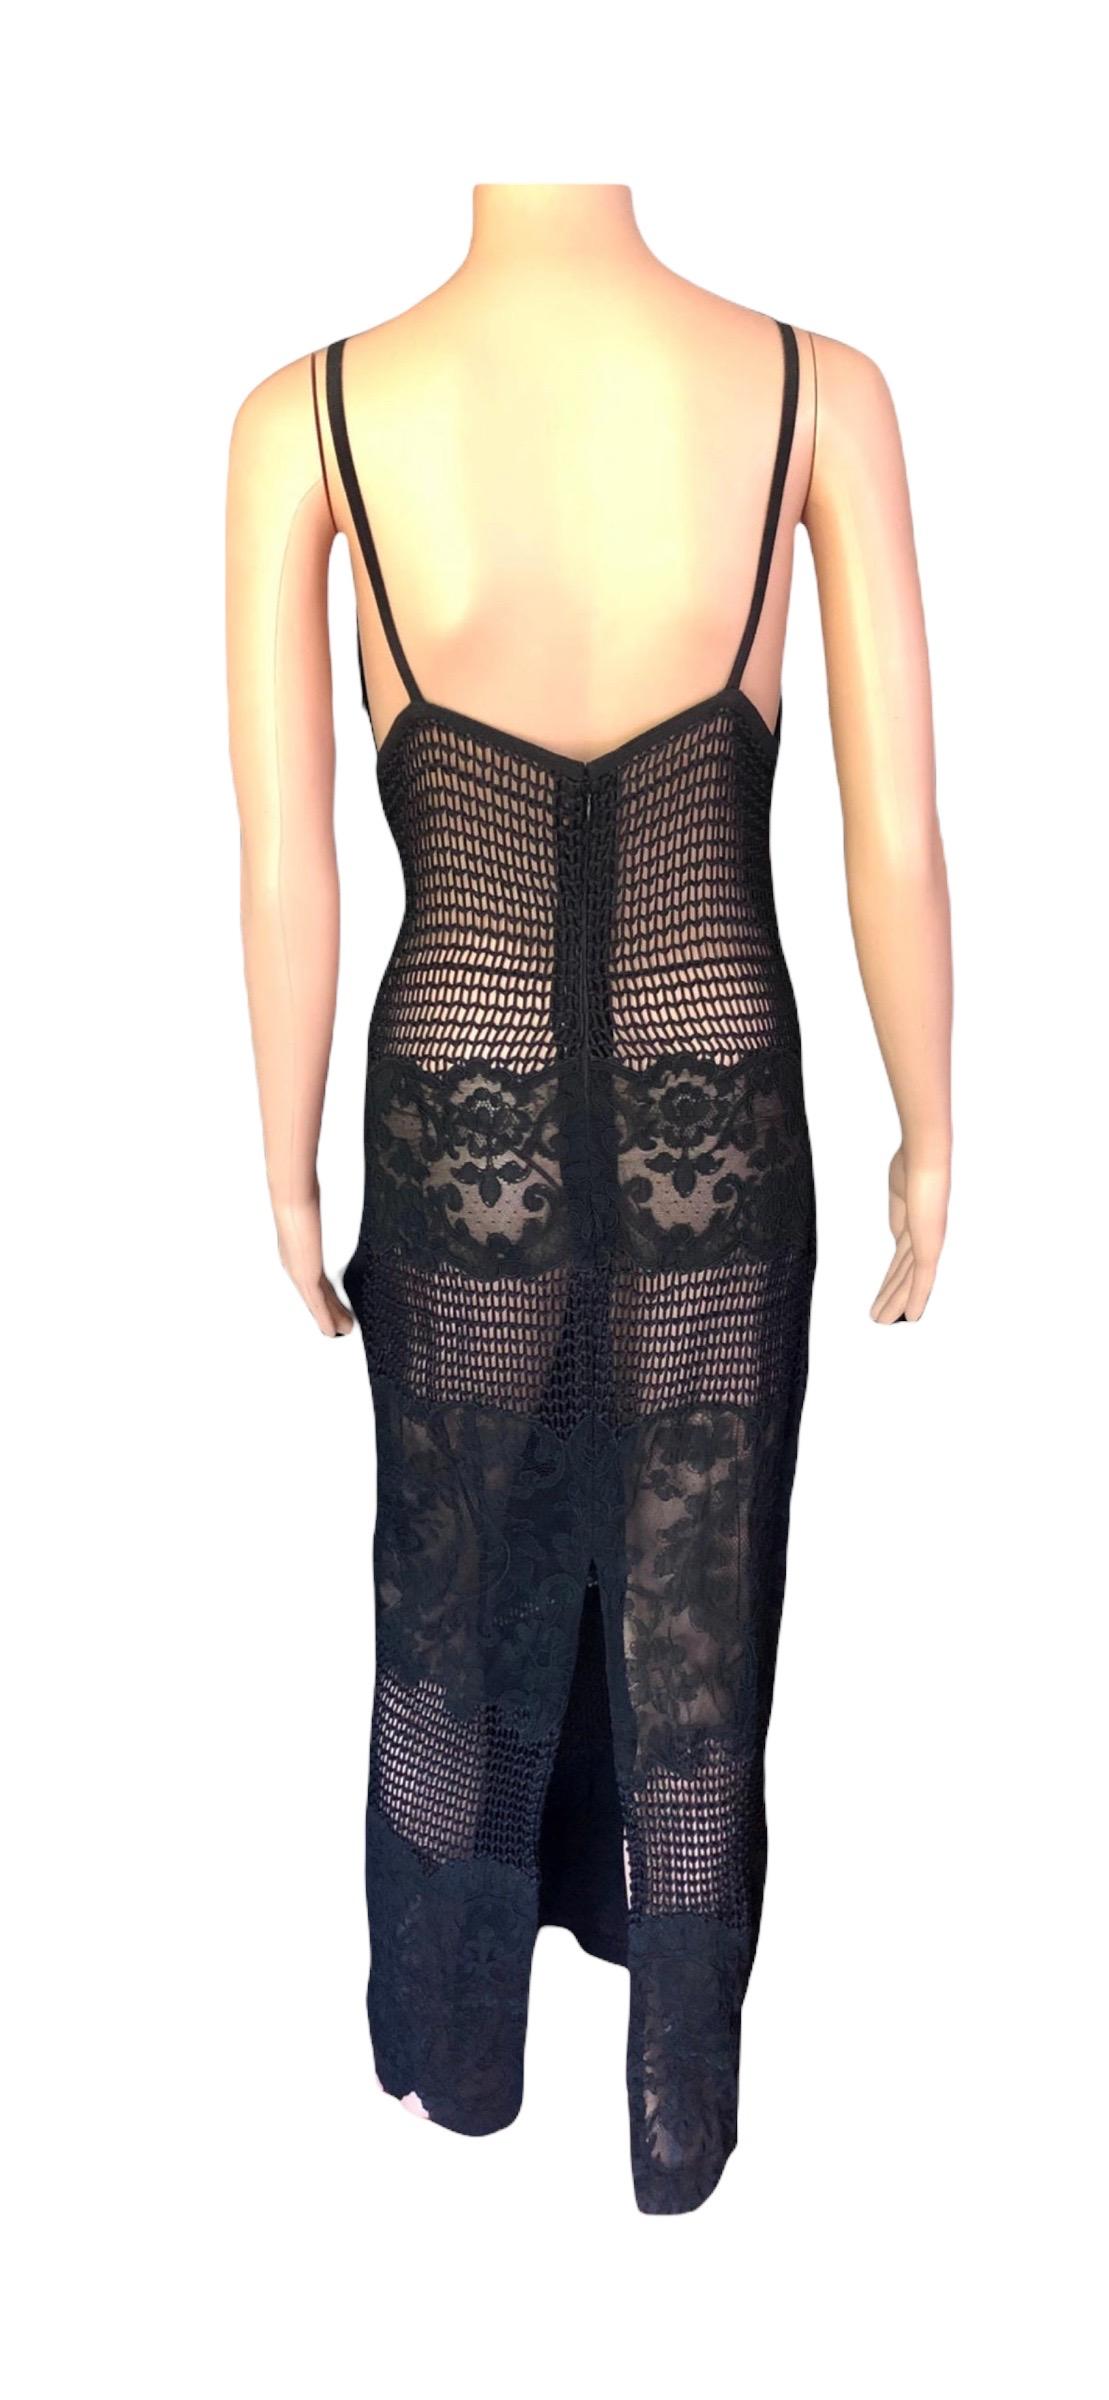 Gianni Versace F/W 1993 Runway Couture Sheer Knit Mesh Lace Evening Dress Gown For Sale 8